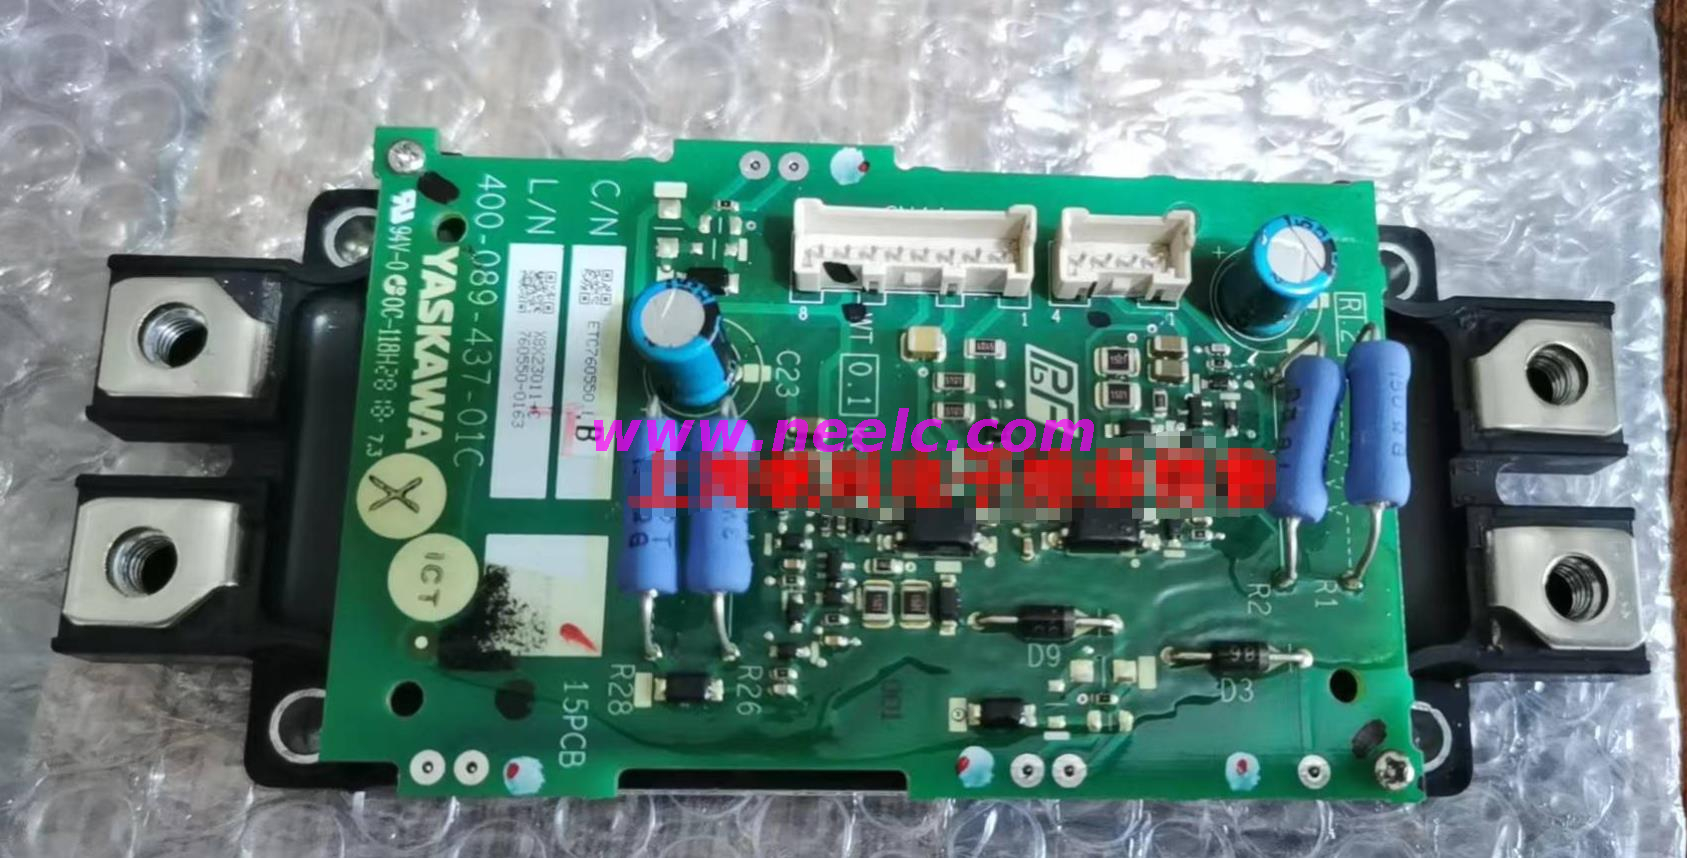 ETC760550 400-089-437-01C Used in good condition control board with IGBT Module